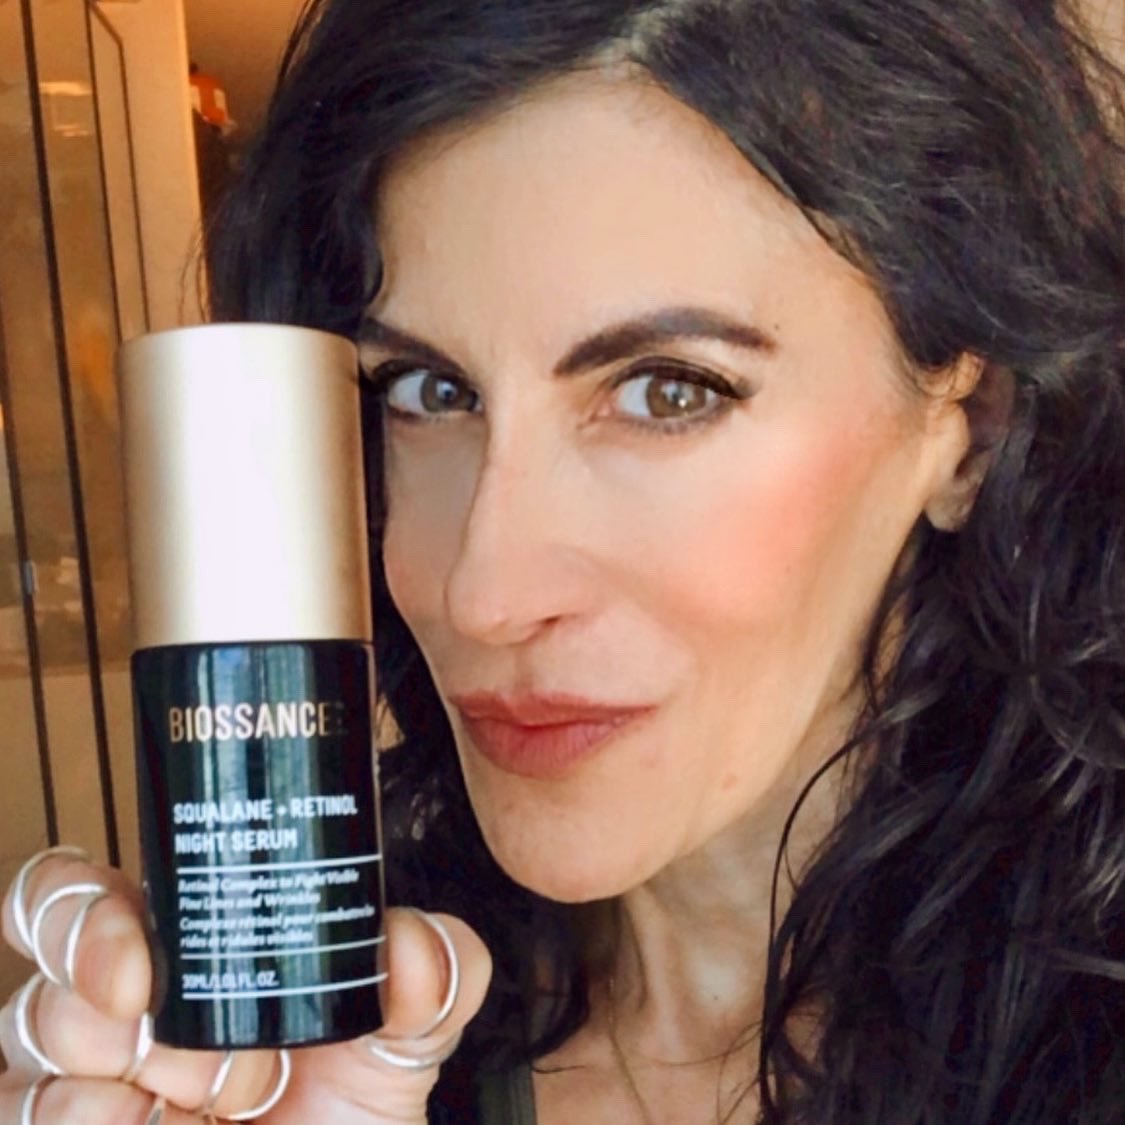 👸🏻 Do you use #NightSerum? 

I received this #Complementary
from @Influenster & @biossance
in exchange for my honest review

#Biossance night serum leaves
my skin SUPER soft & hydrated!

#lynnjulian #cleanbeautyproducts #naturalbeautyproducts
#beautyinfluencer #beautyinfluencers